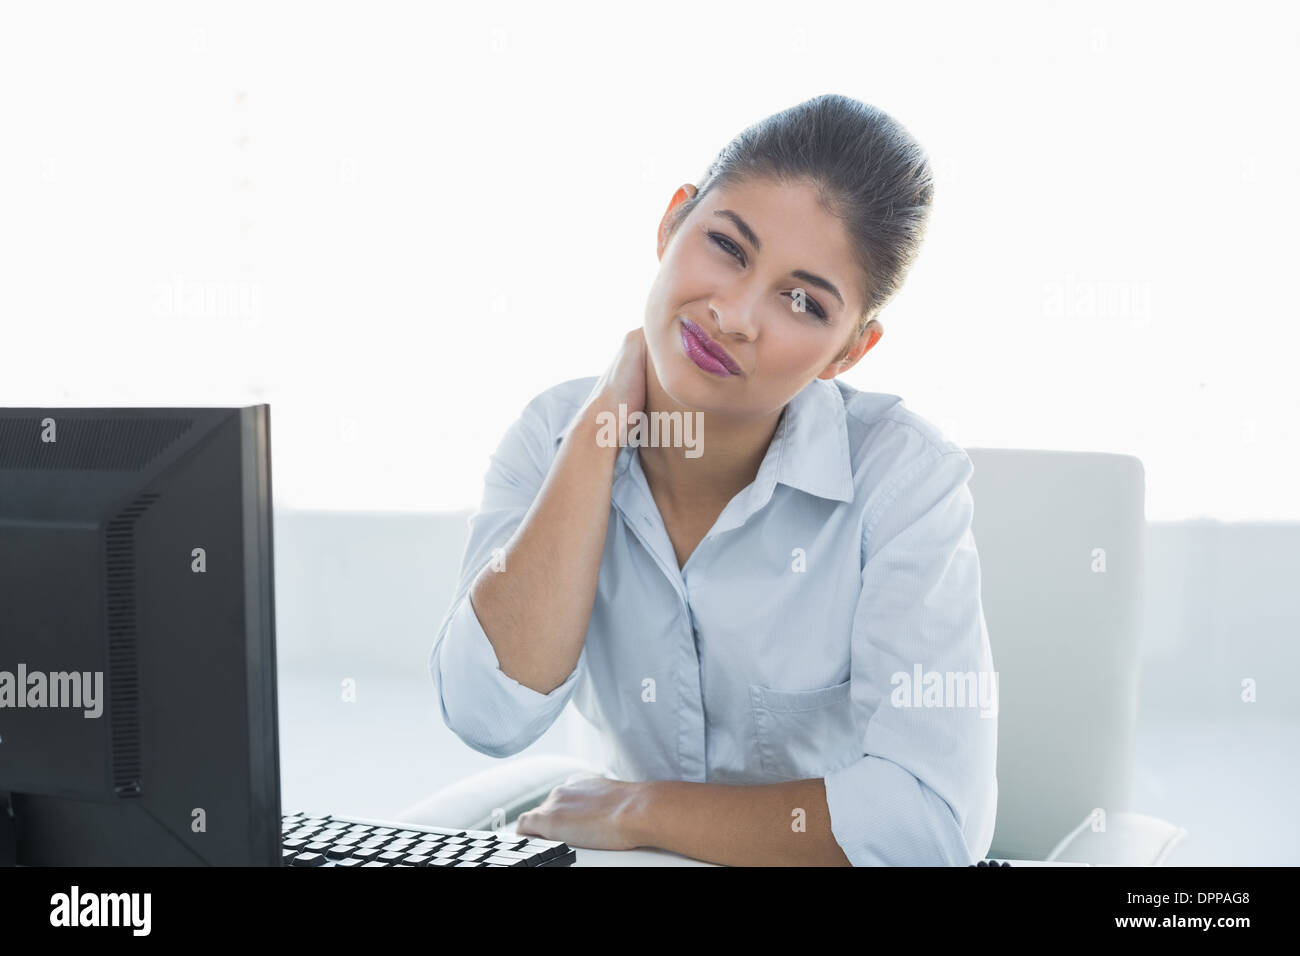 Businesswoman with neck pain in front of computer Stock Photo